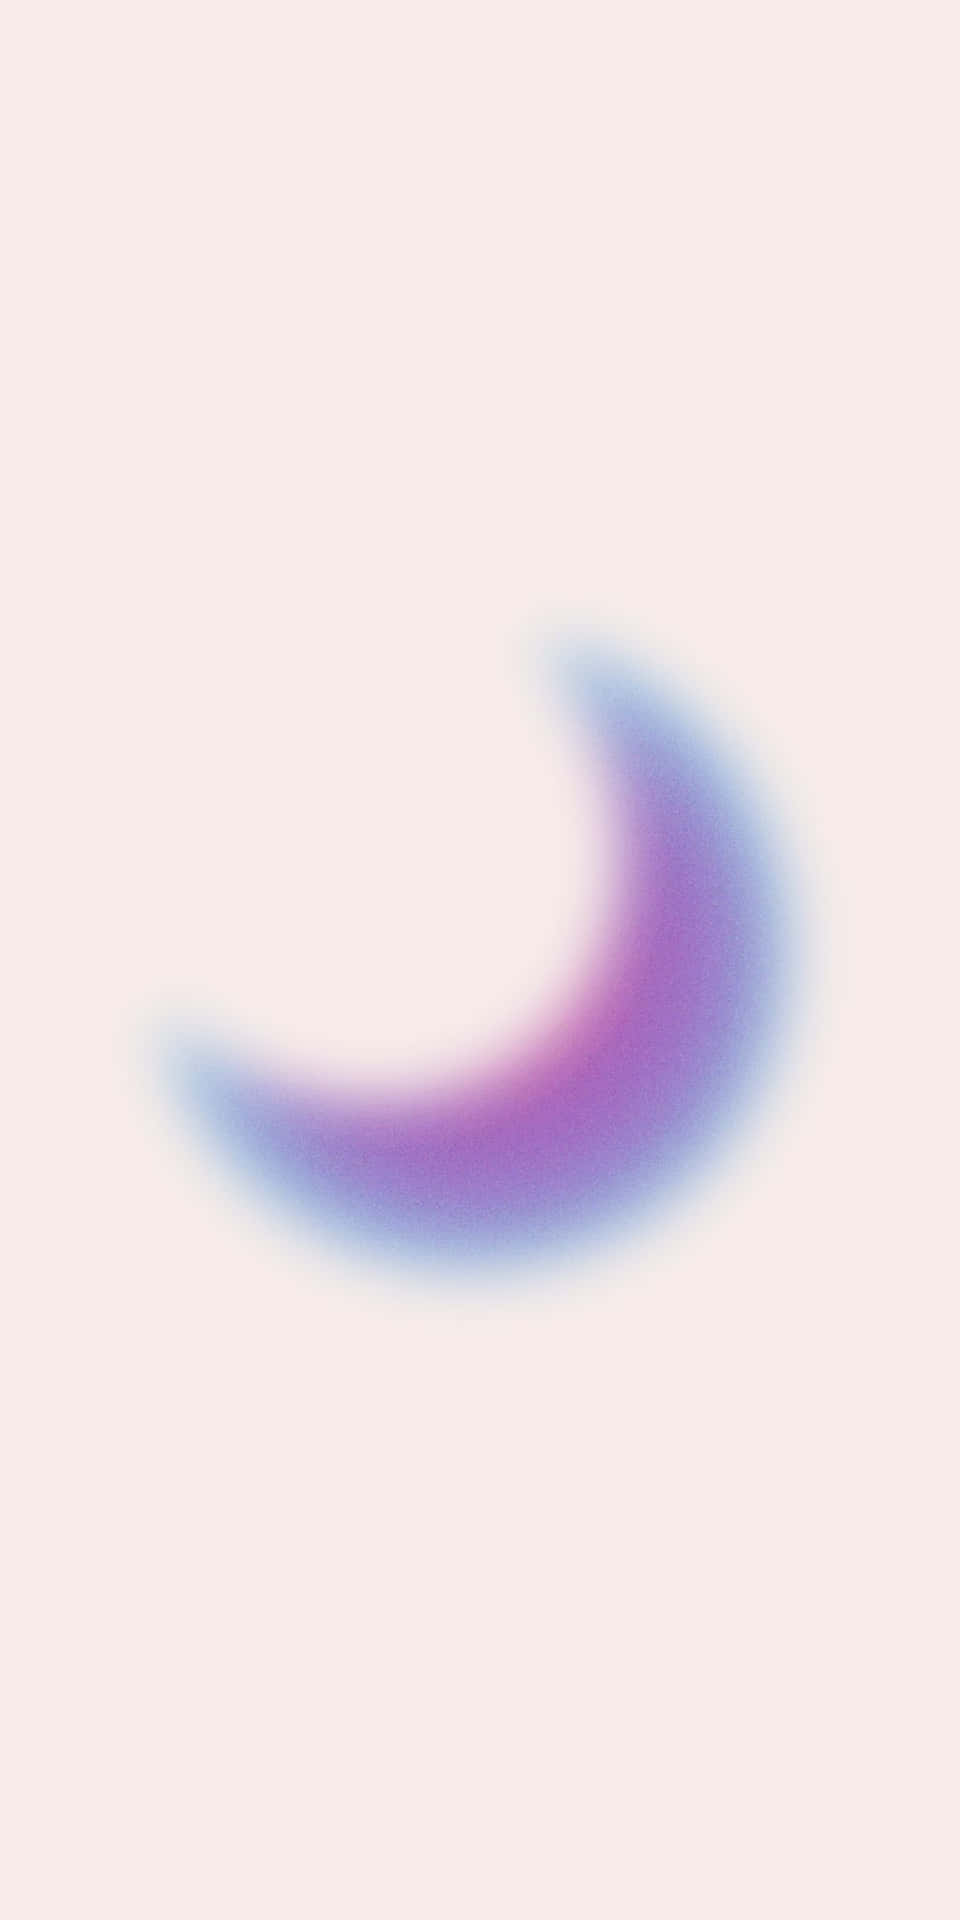 Blue, Purple Moon Aura Background For Android And Mobile Phones